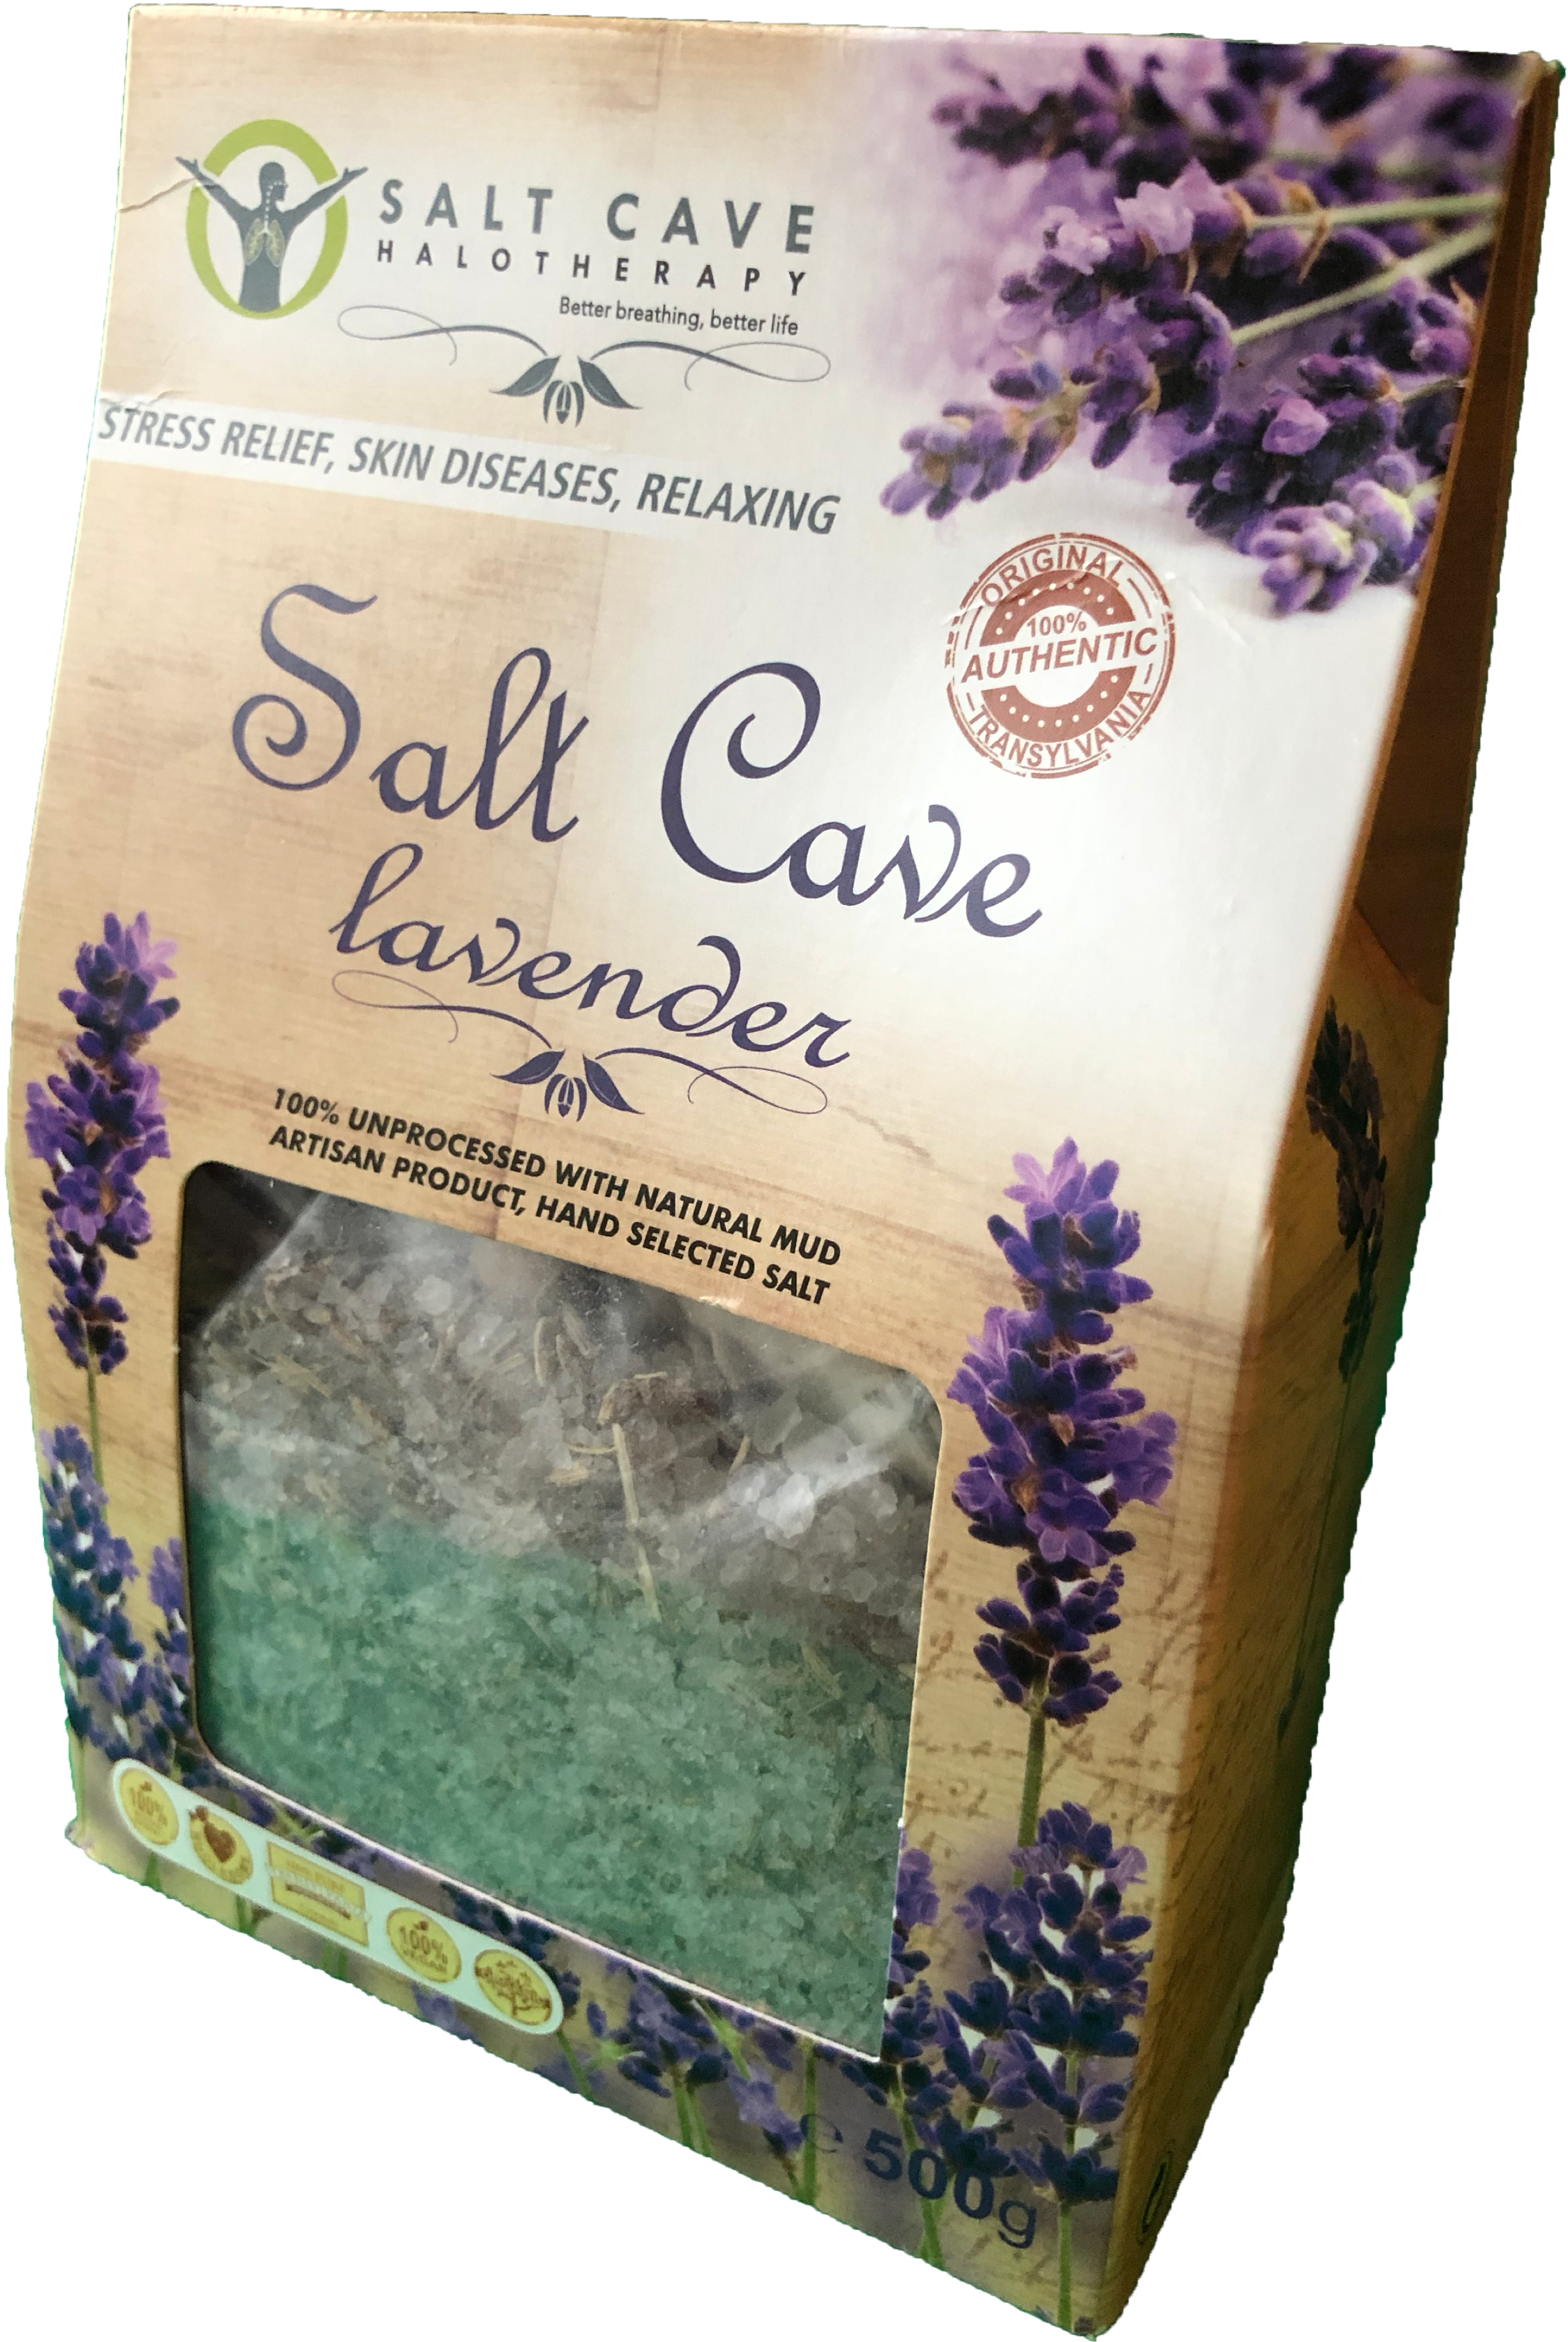 Salt Cave Lavender Therapy Product